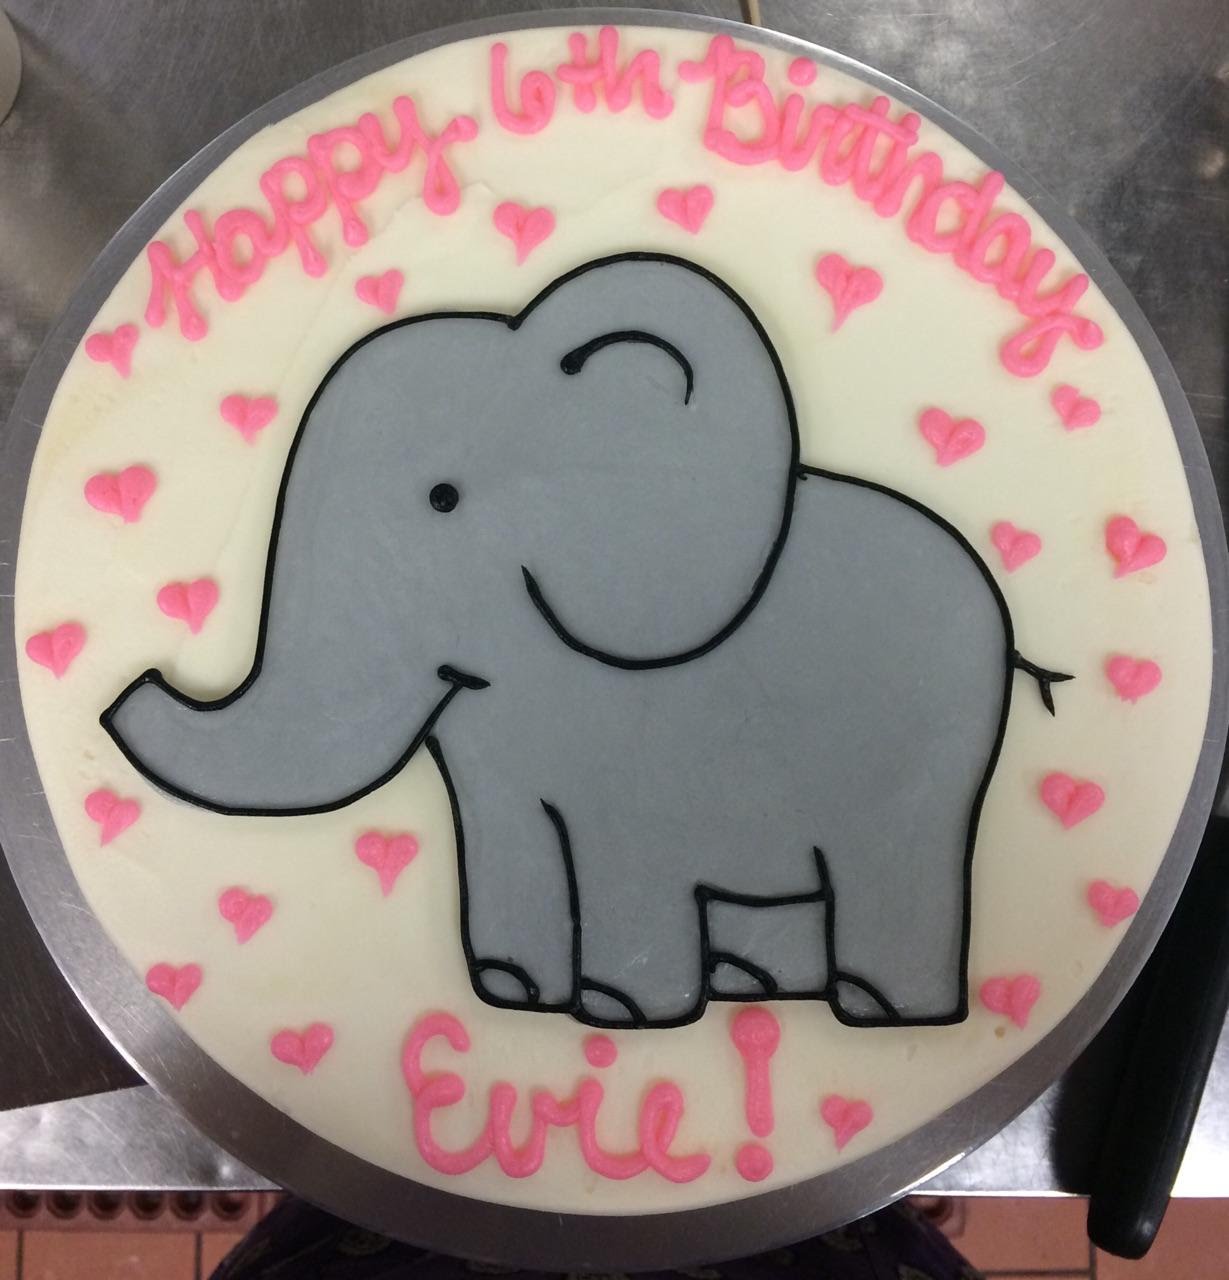 SINGLE ELEPHANT WITH SMALL HEARTS CUTE BAY SHOWER CAKE IN CHICAGO ILLINOIS